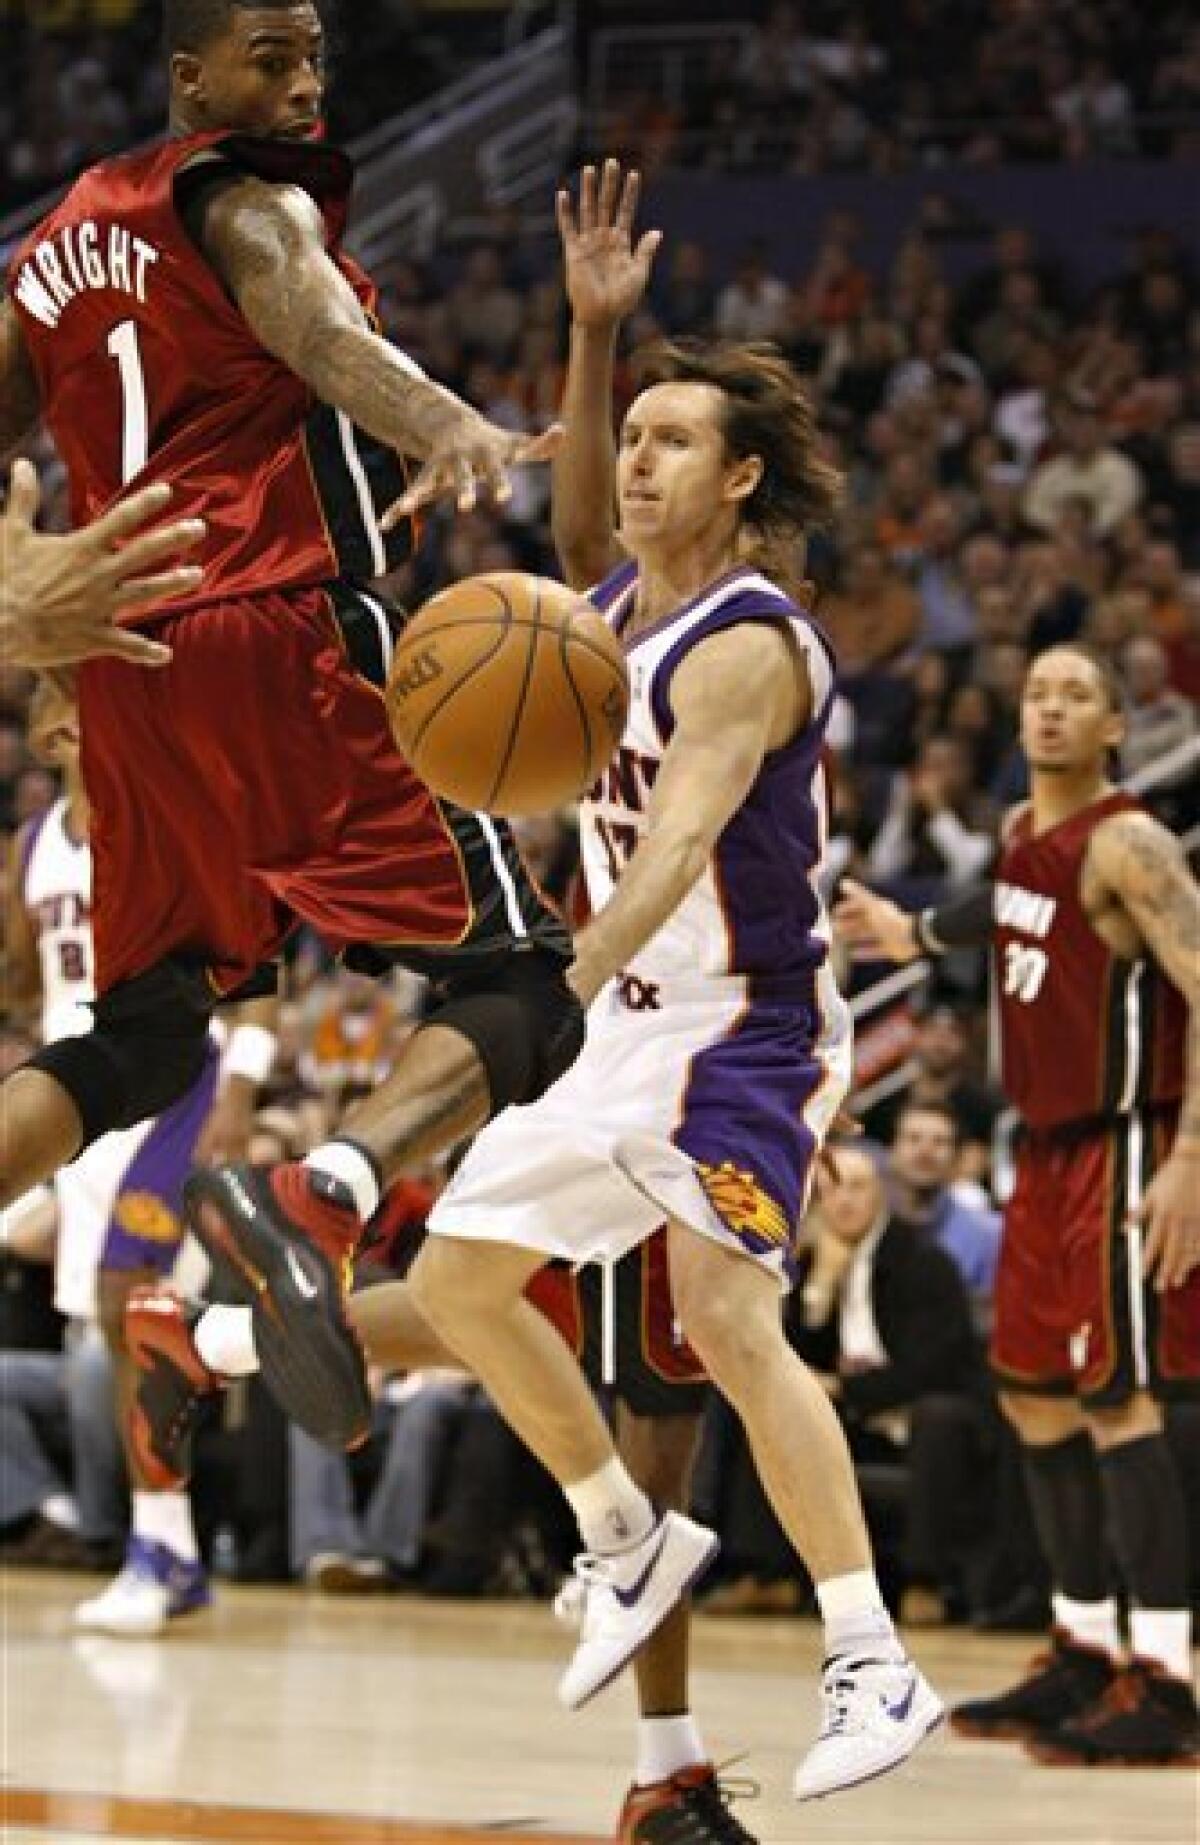 Miami Heat's Jermaine O'Neal drives to the basket against the